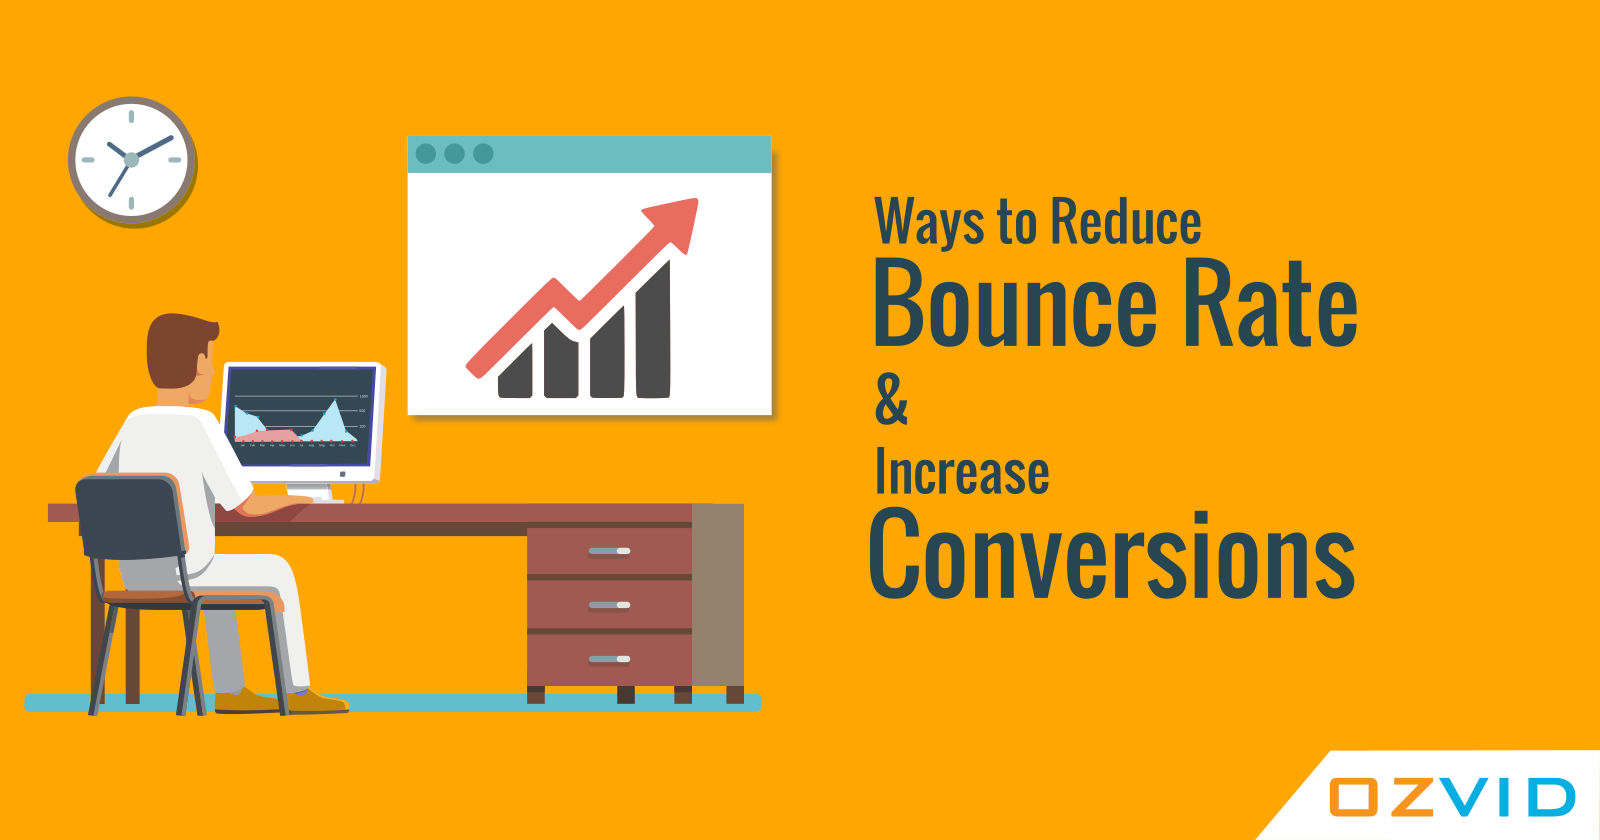 Proven Ways to Reduce Bounce Rate and Increase Conversions